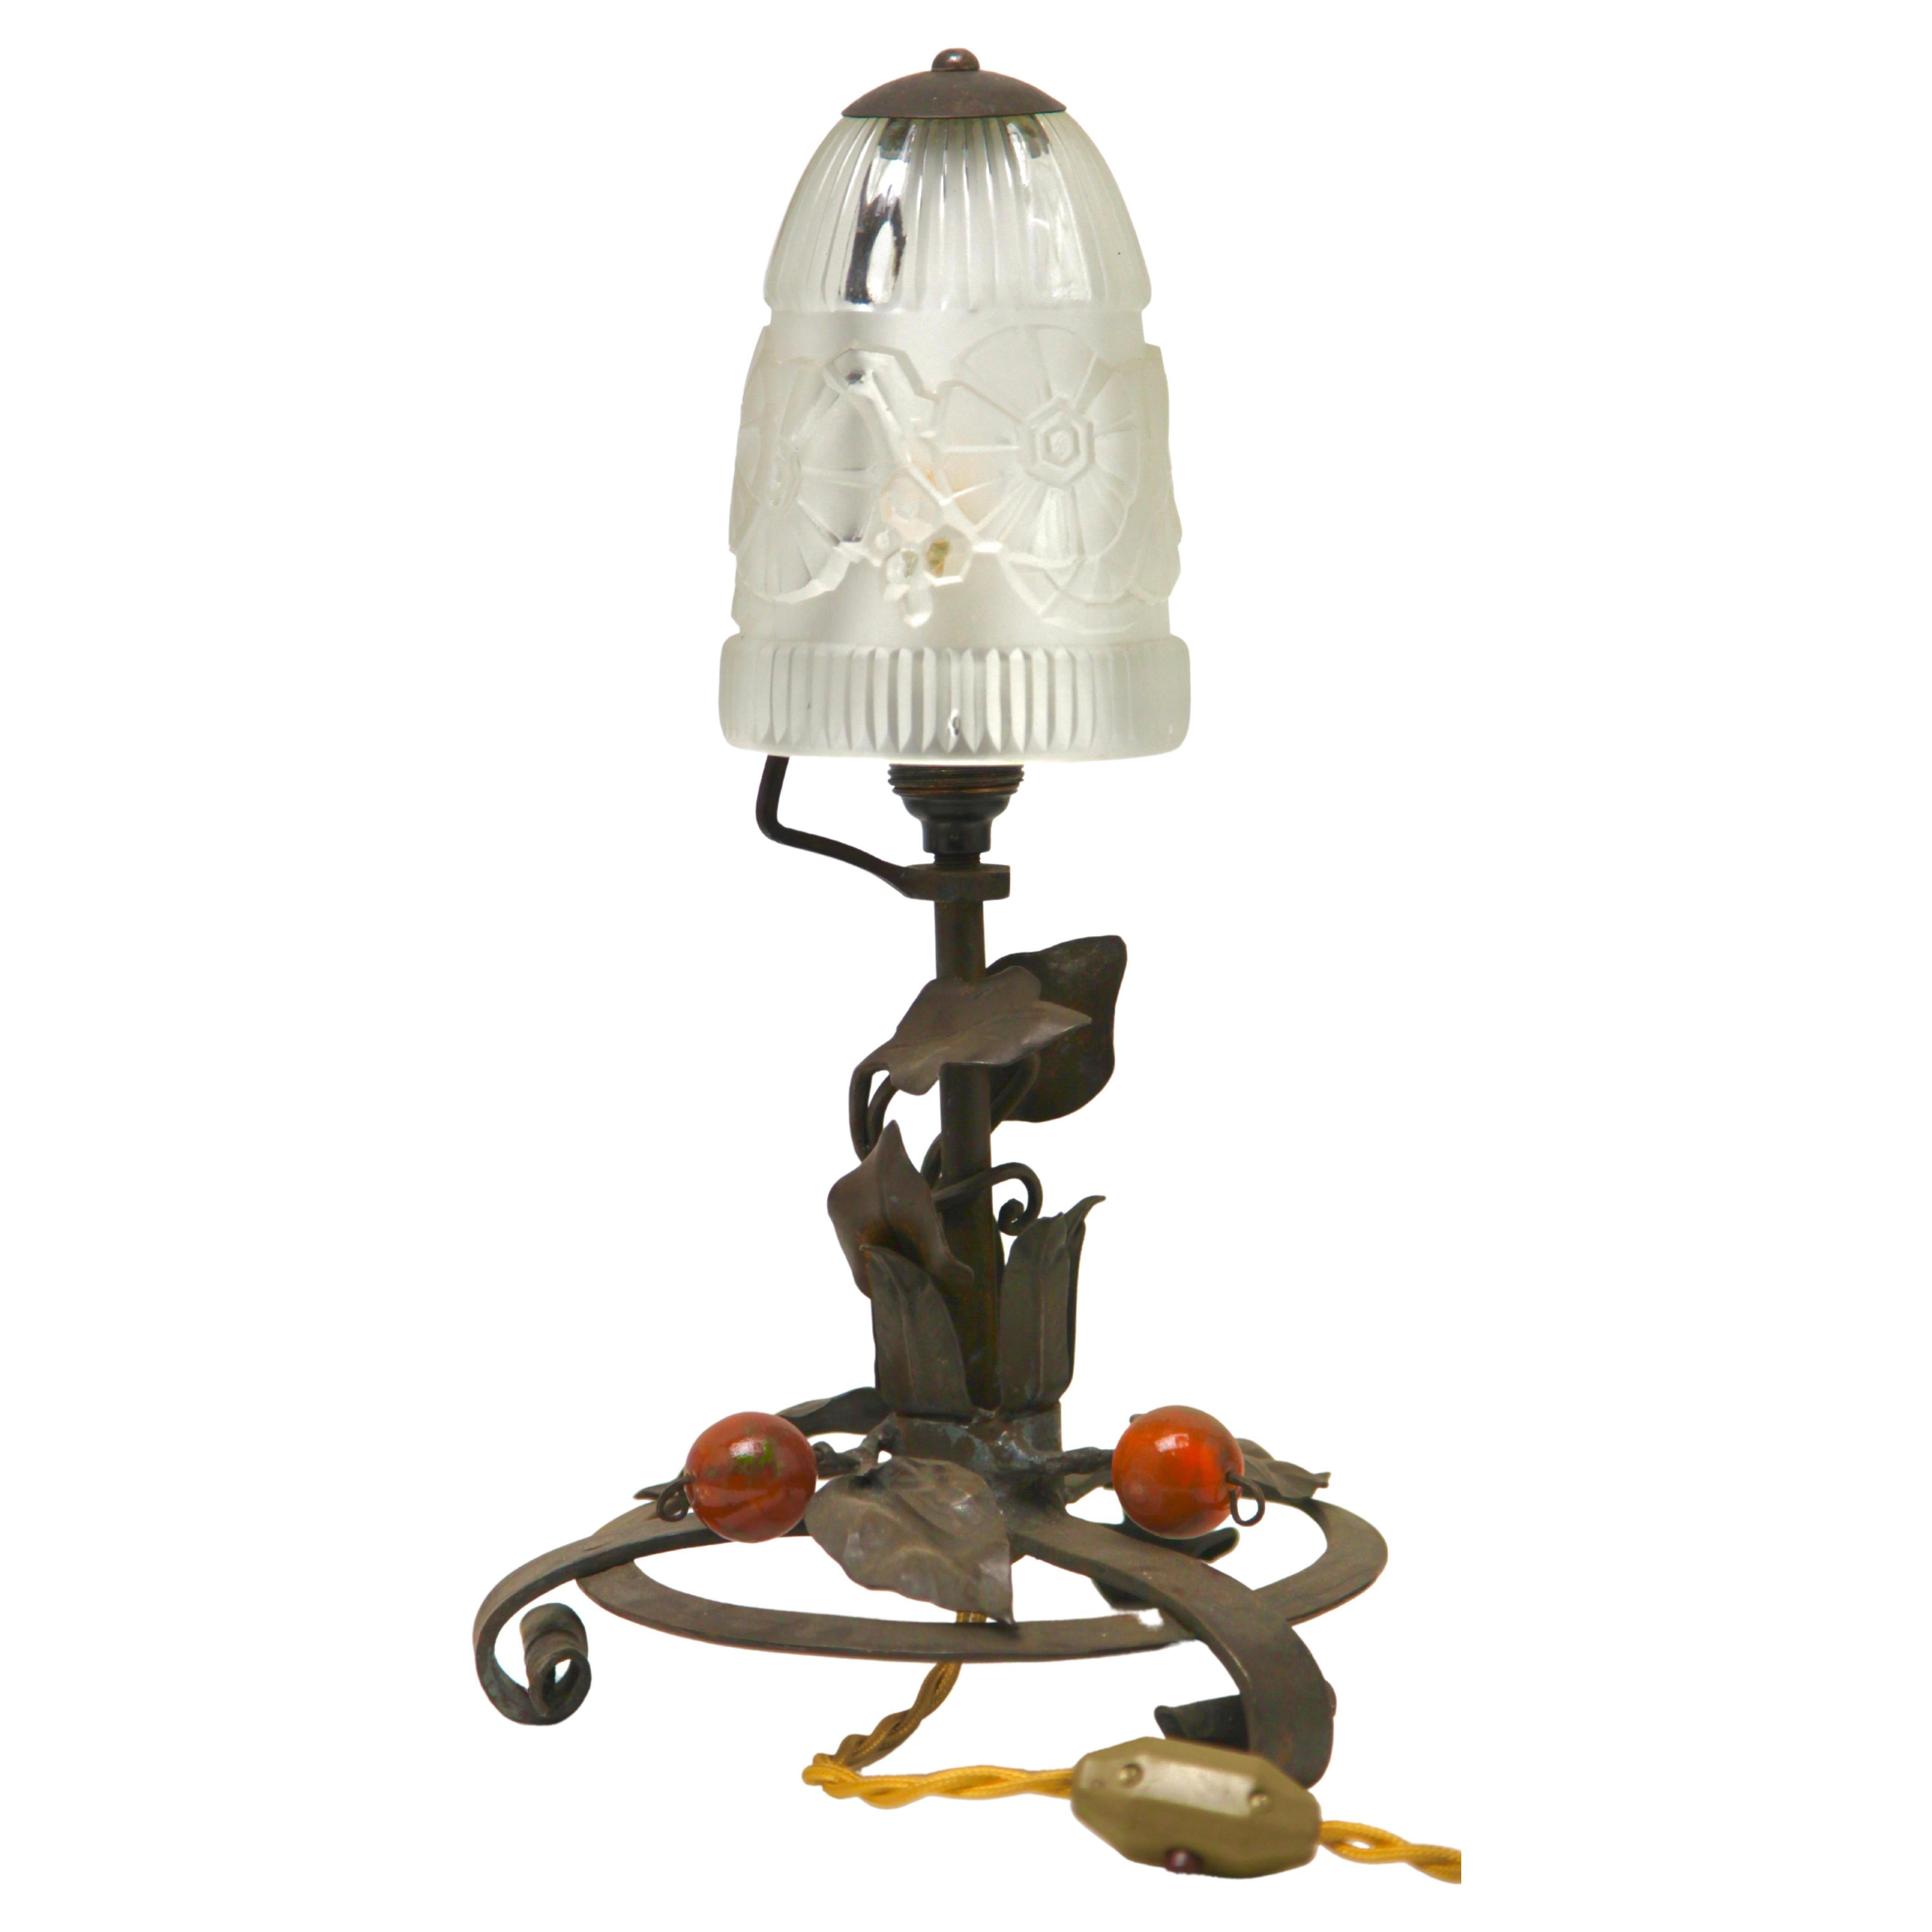 French Art Nouveau Lamp in Wrought Iron with Glass Shade, 1920s For Sale